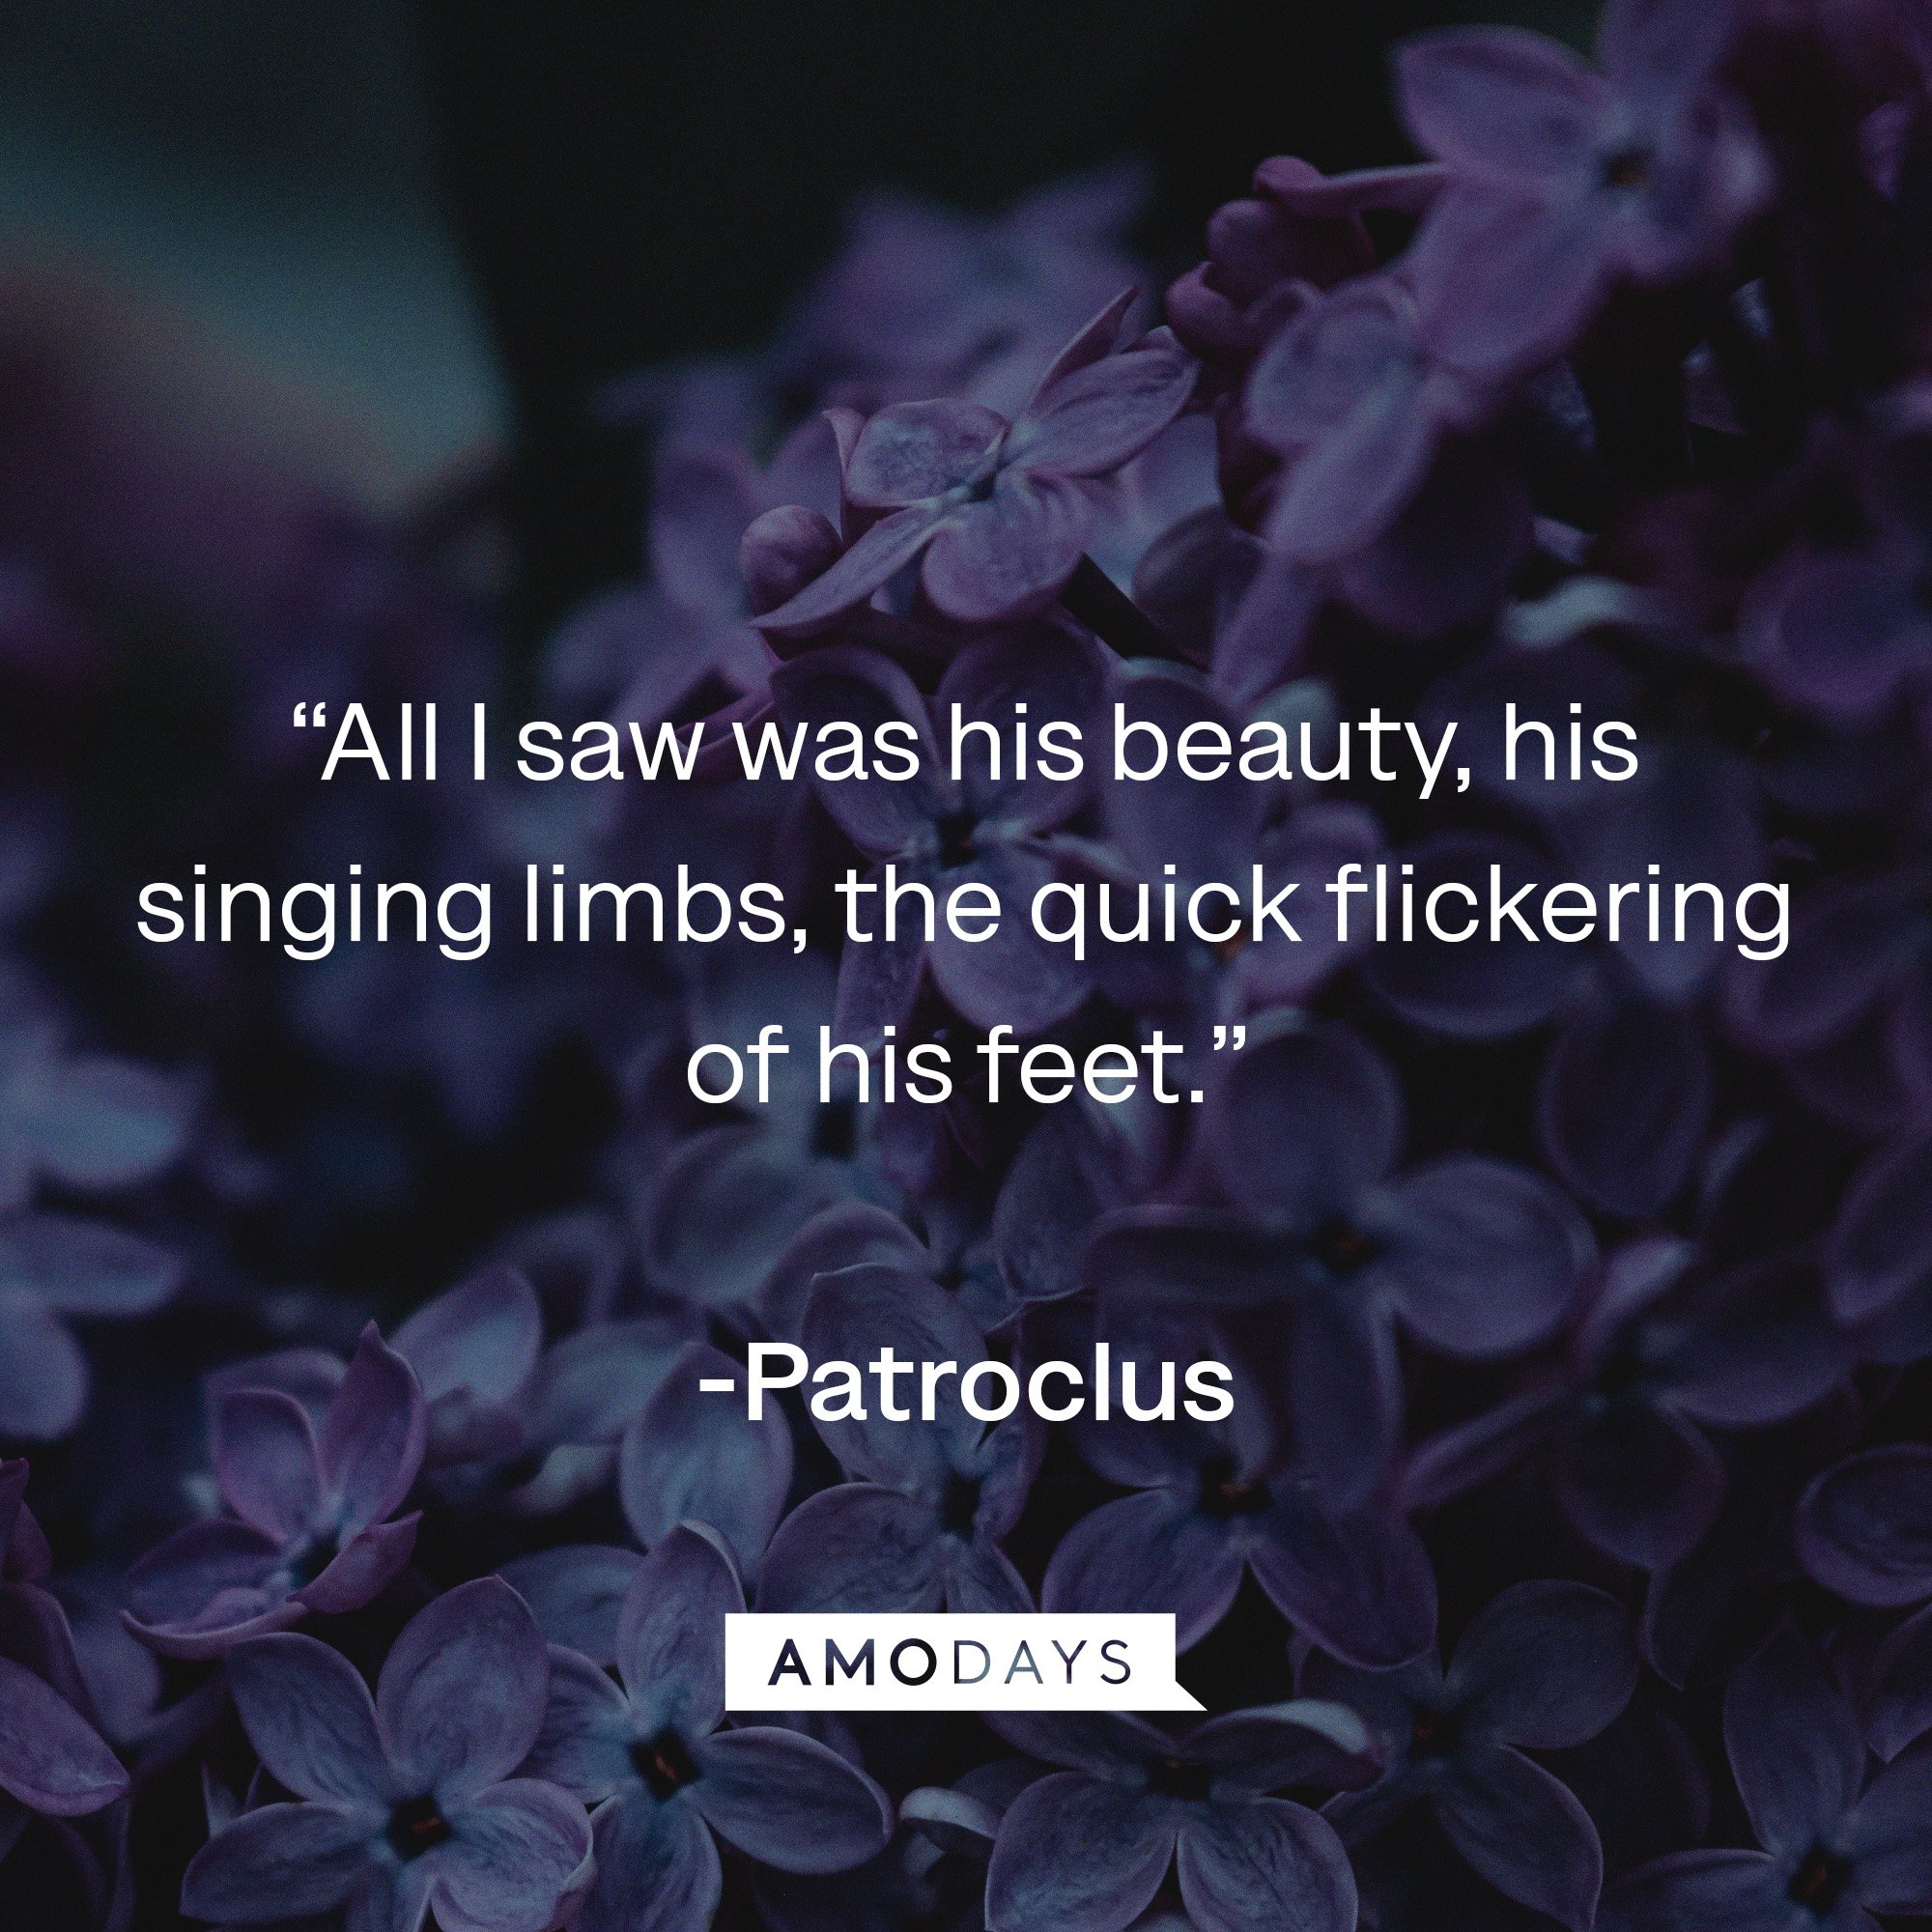 Patroclus's quote: “All I saw was his beauty, his singing limbs, the quick flickering of his feet.” | Image: AmoDays